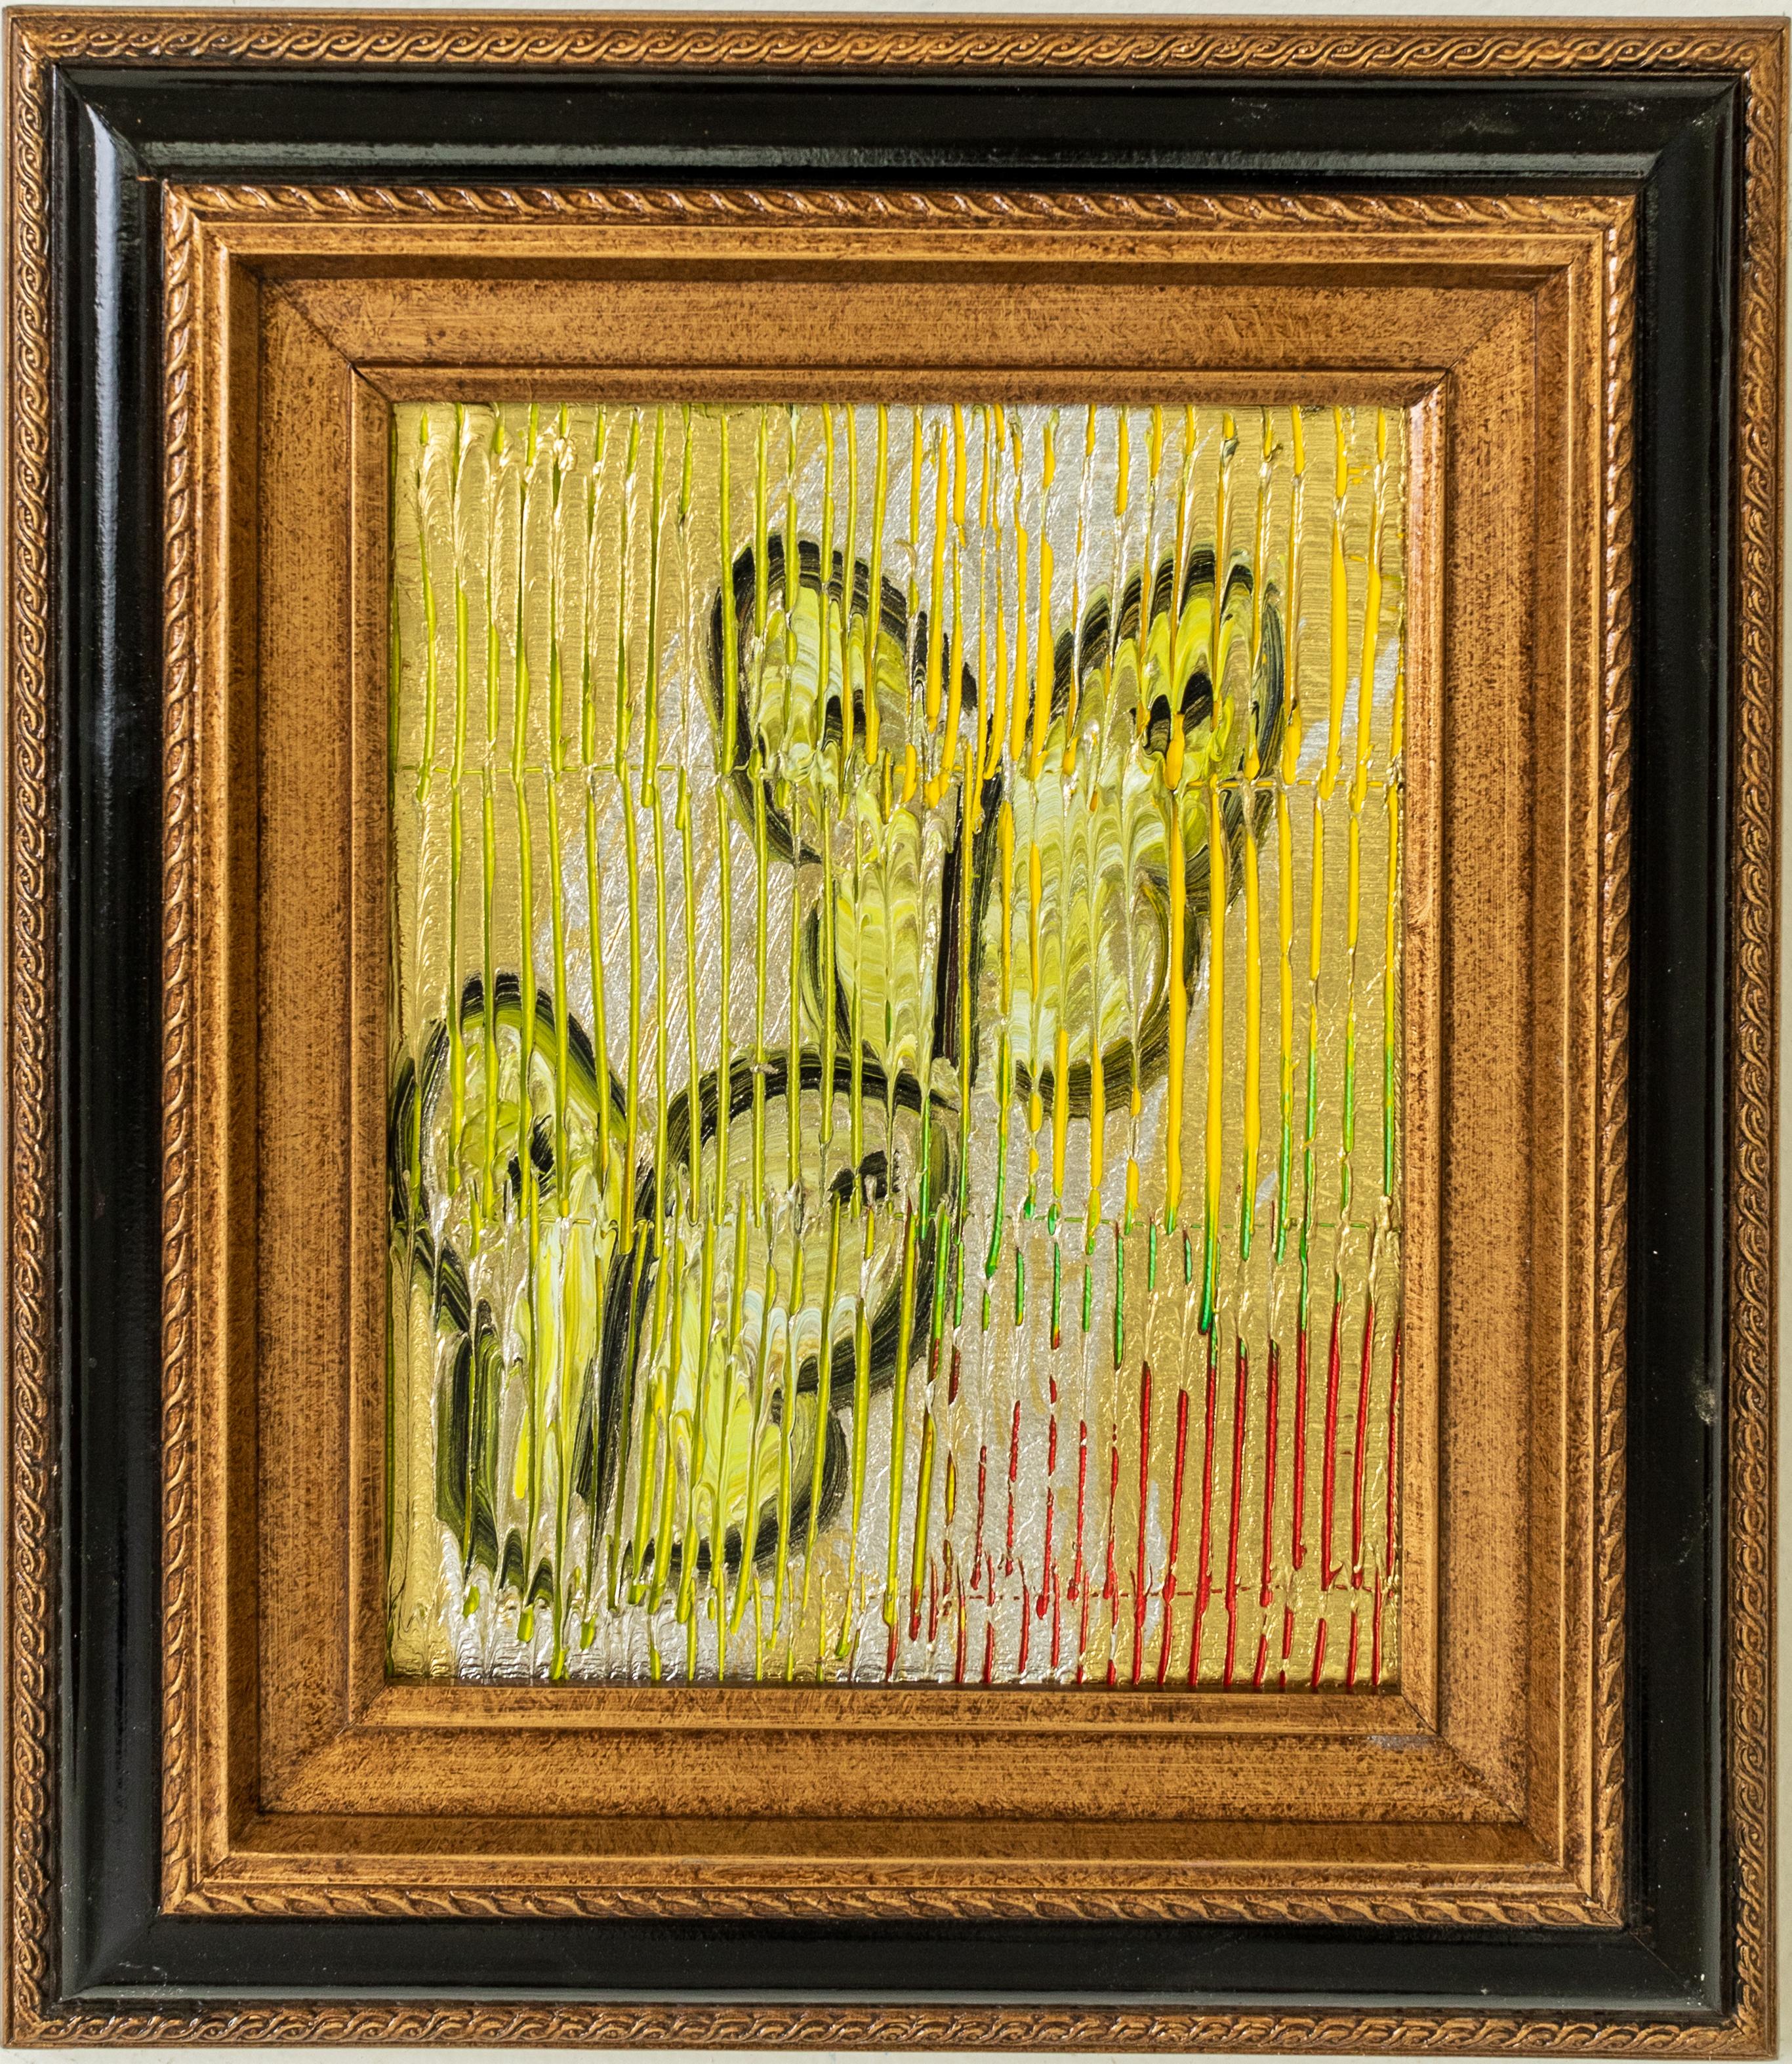 Multicolored butterfly painting by Hunt Slonem  in vintage gold frame. This gestural, neo-expressionist butterfly painting is a wonderful example of Hunt Slonem's signature style. 

Painting size is 10 x 8 and the framed size is 15.5 x 13.5